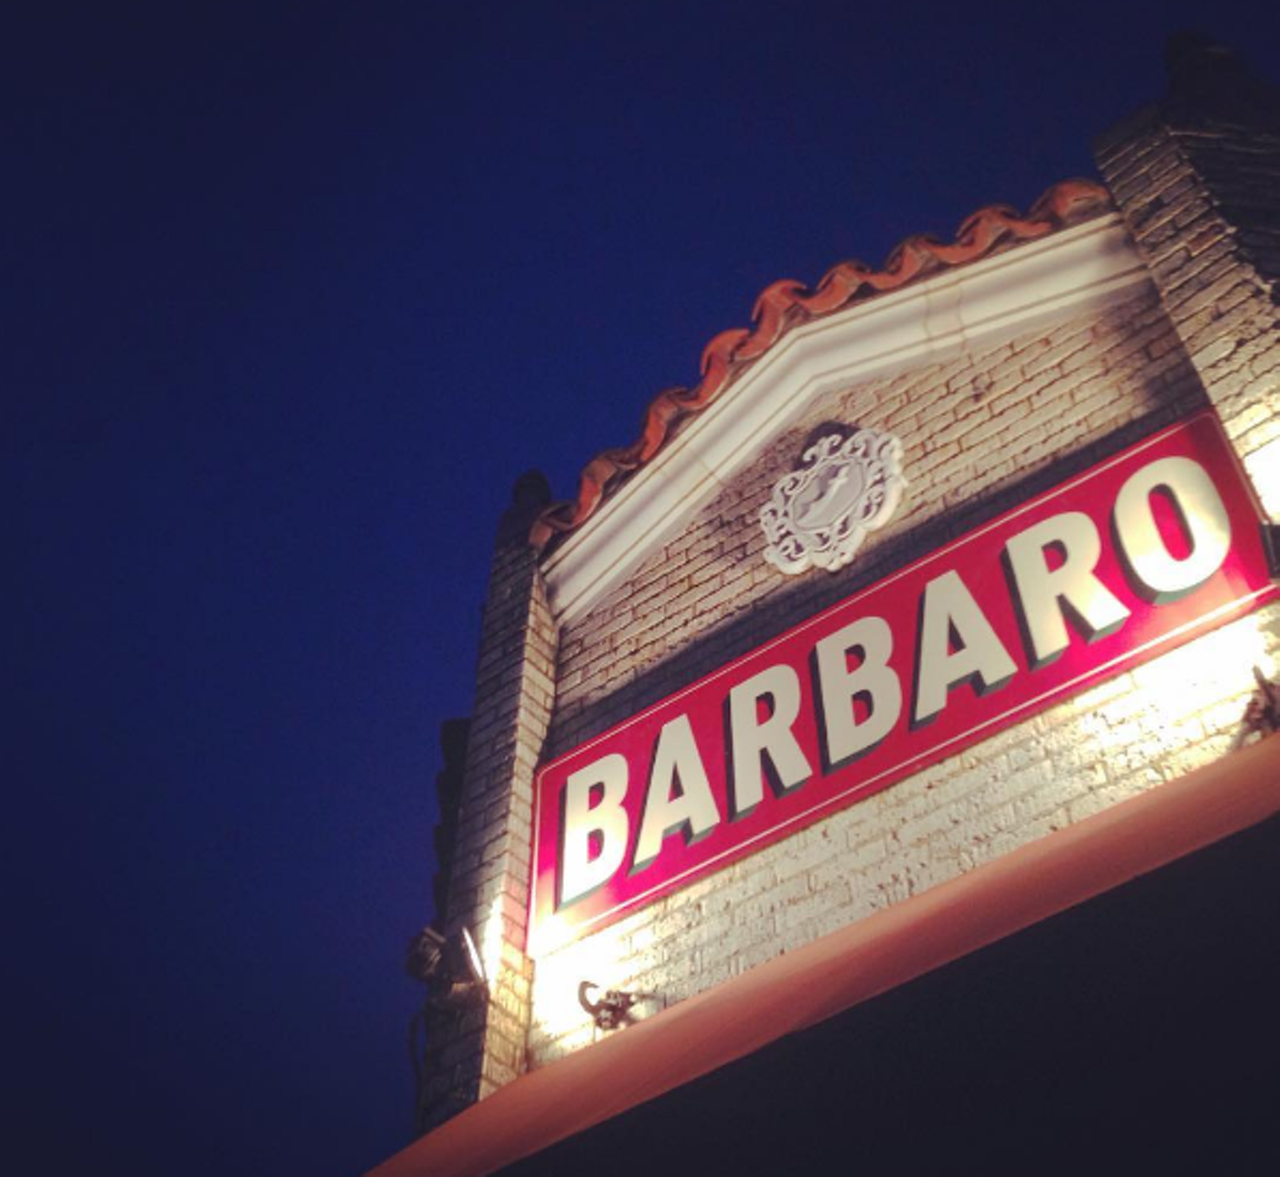 Barbaro
2720 McCullough Ave., (210) 320-2261,  barbarosanantonio.com
Open until 11:30 p.m. Sunday-Thursday; 12:30 a.m. Friday and Saturday, Barbaro&#146;s has the pizza, drinks and late-night atmosphere you need.
Photo via Instagram, sun_carlos